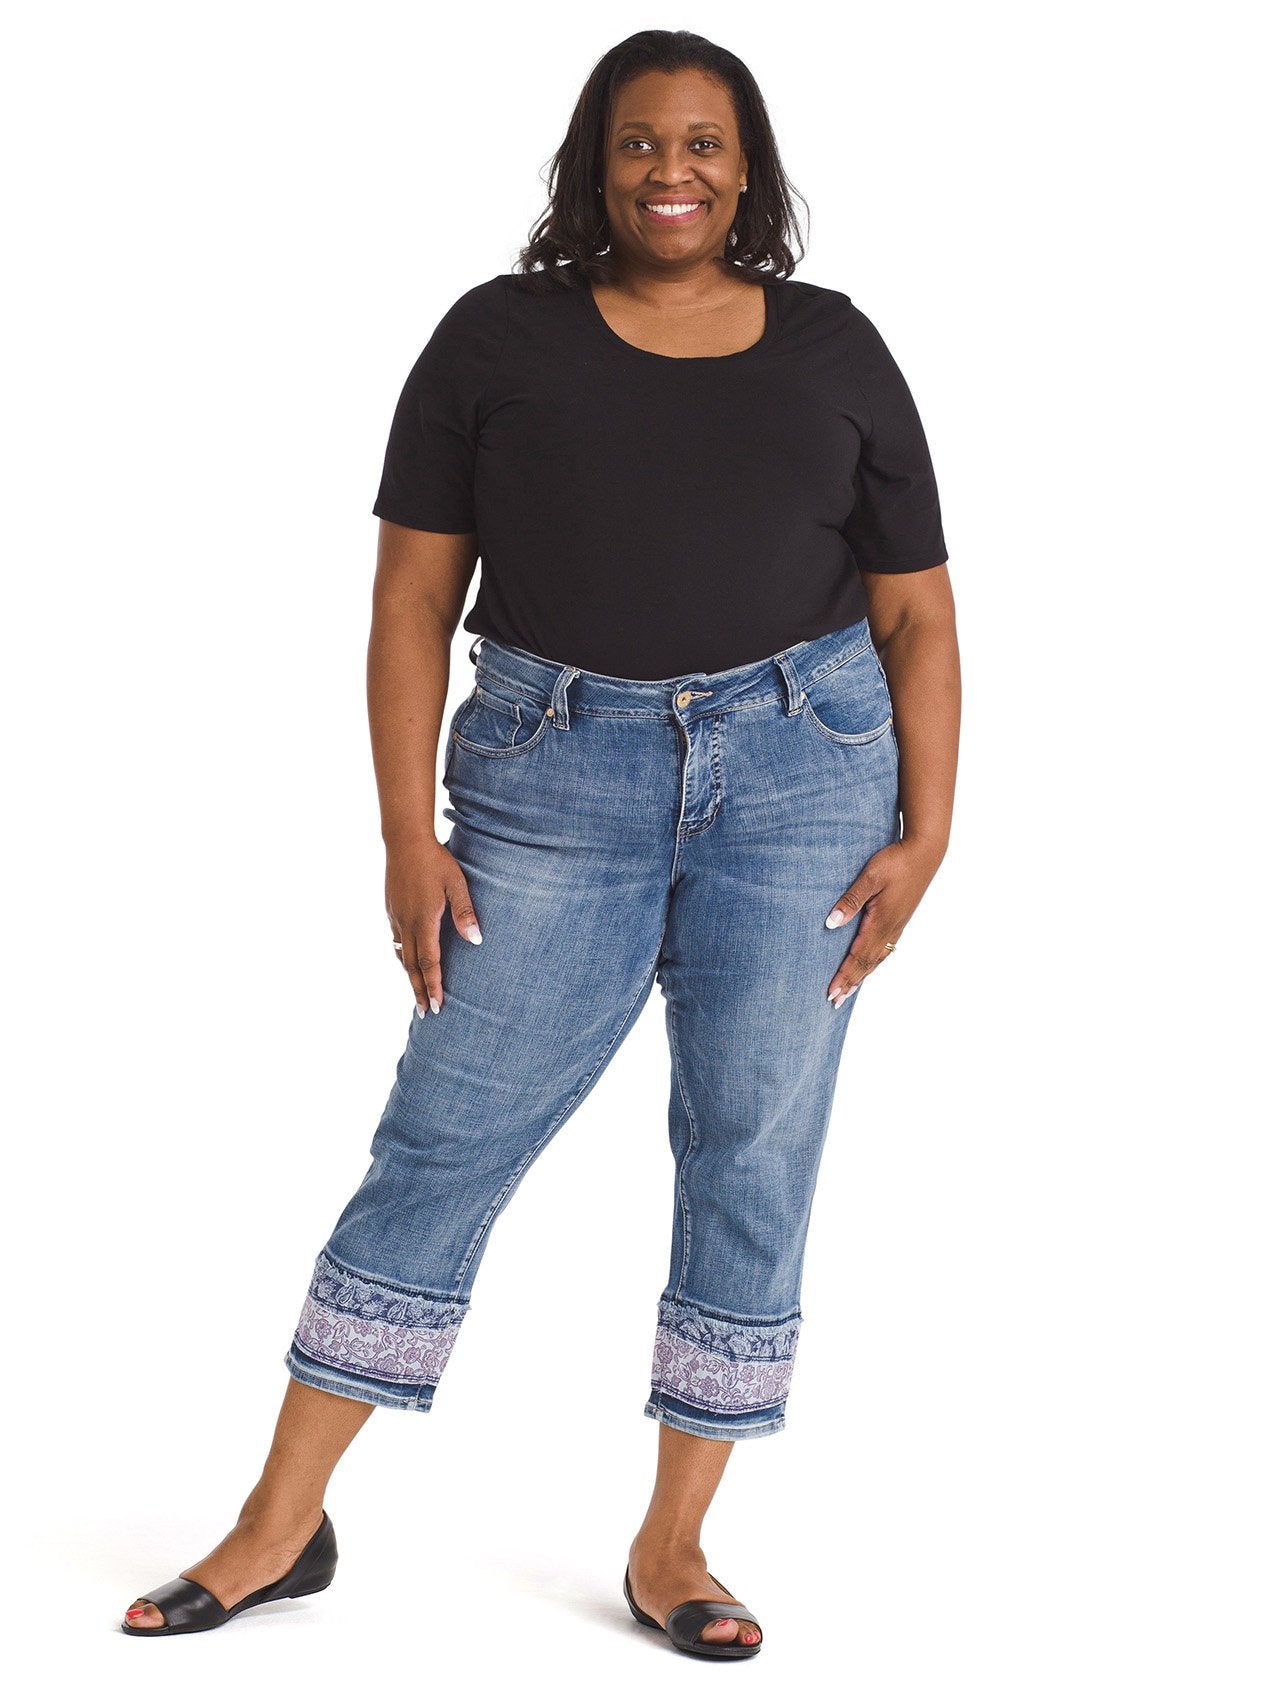 Sow parti politi Patched Layered Hem Carter Girlfriend Jeans | JAG Jeans | Gwynnie Bee  Rental Subscription